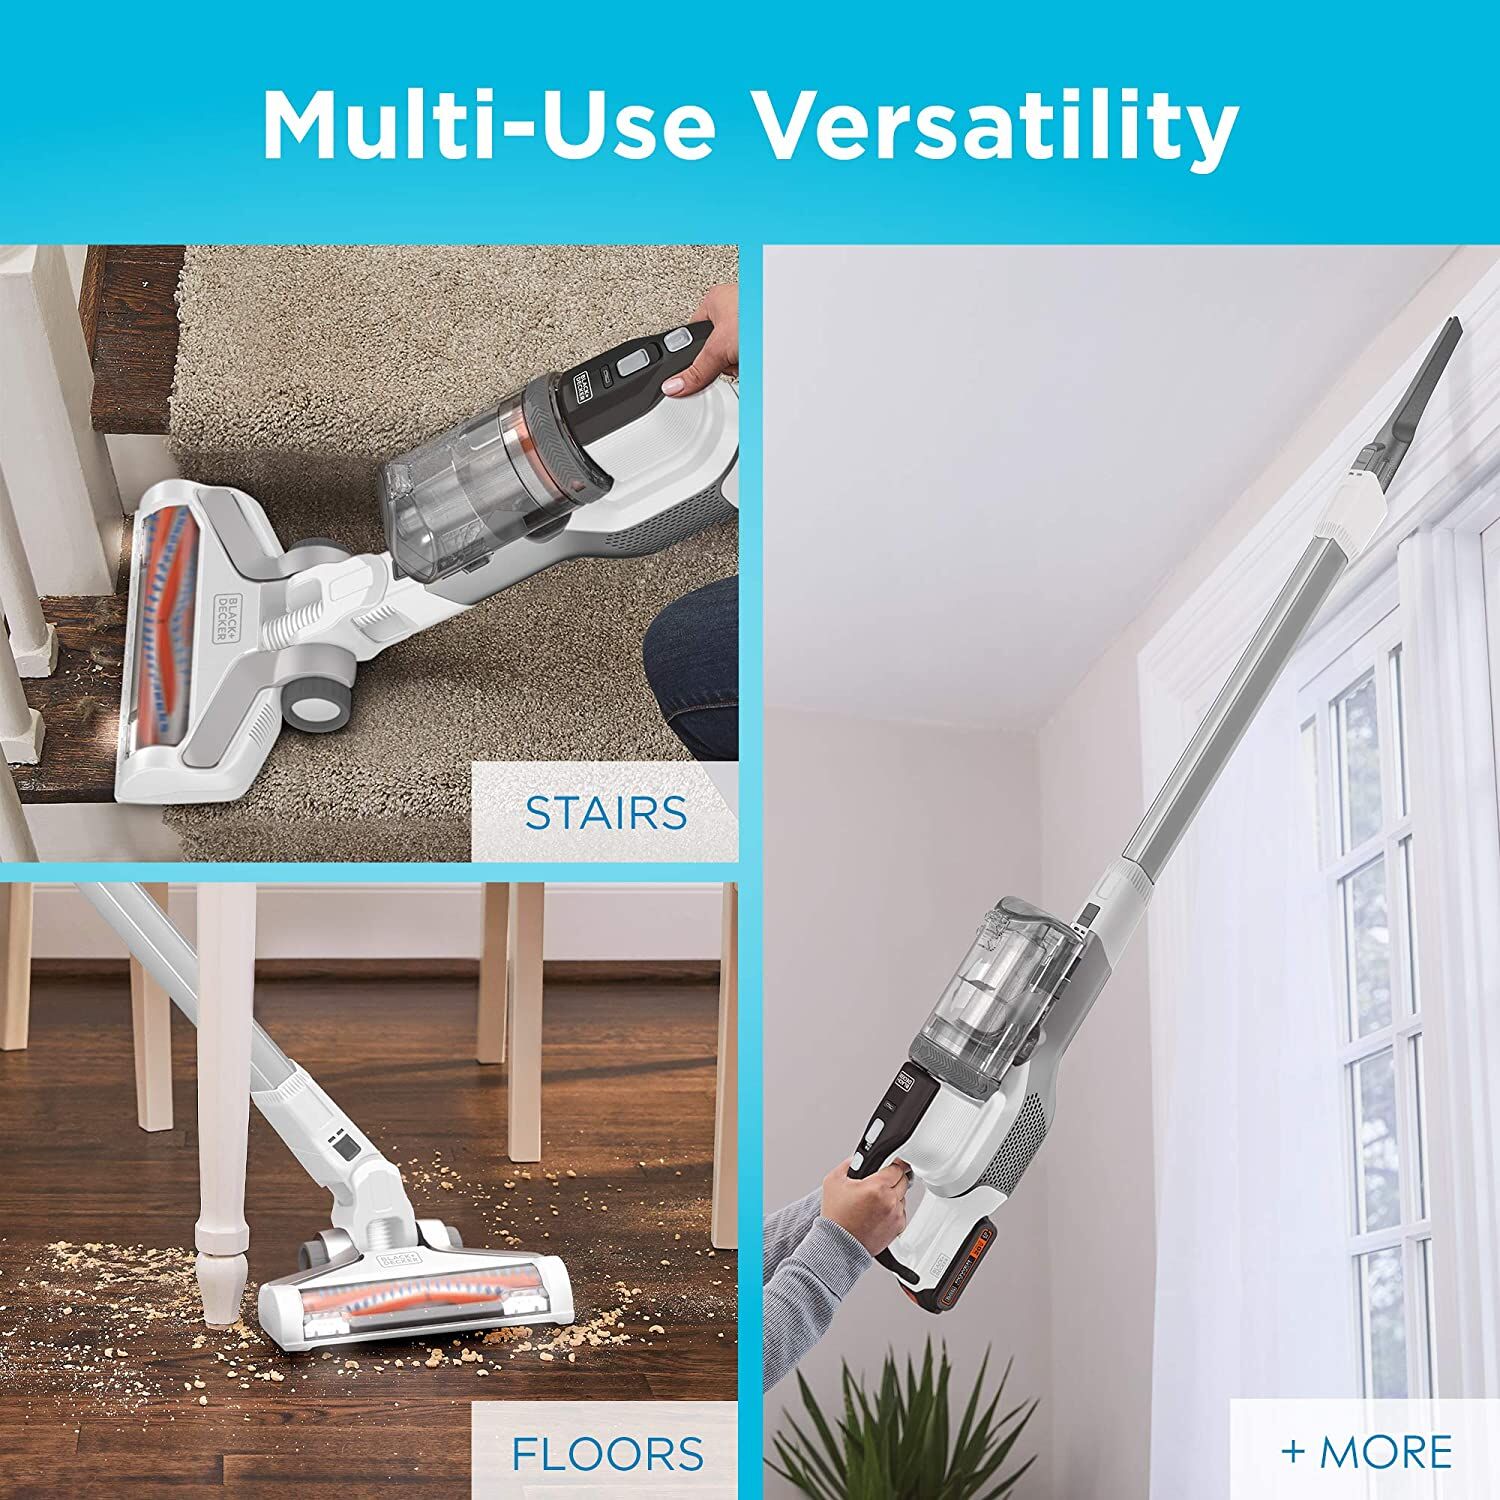 Images featuring Black and decker Power series extreme 20 volt max stick vacuum versatile uses including cleaning a carpet on stairs, cleaning up mess from a hardwood floor & cleaning dust above a window